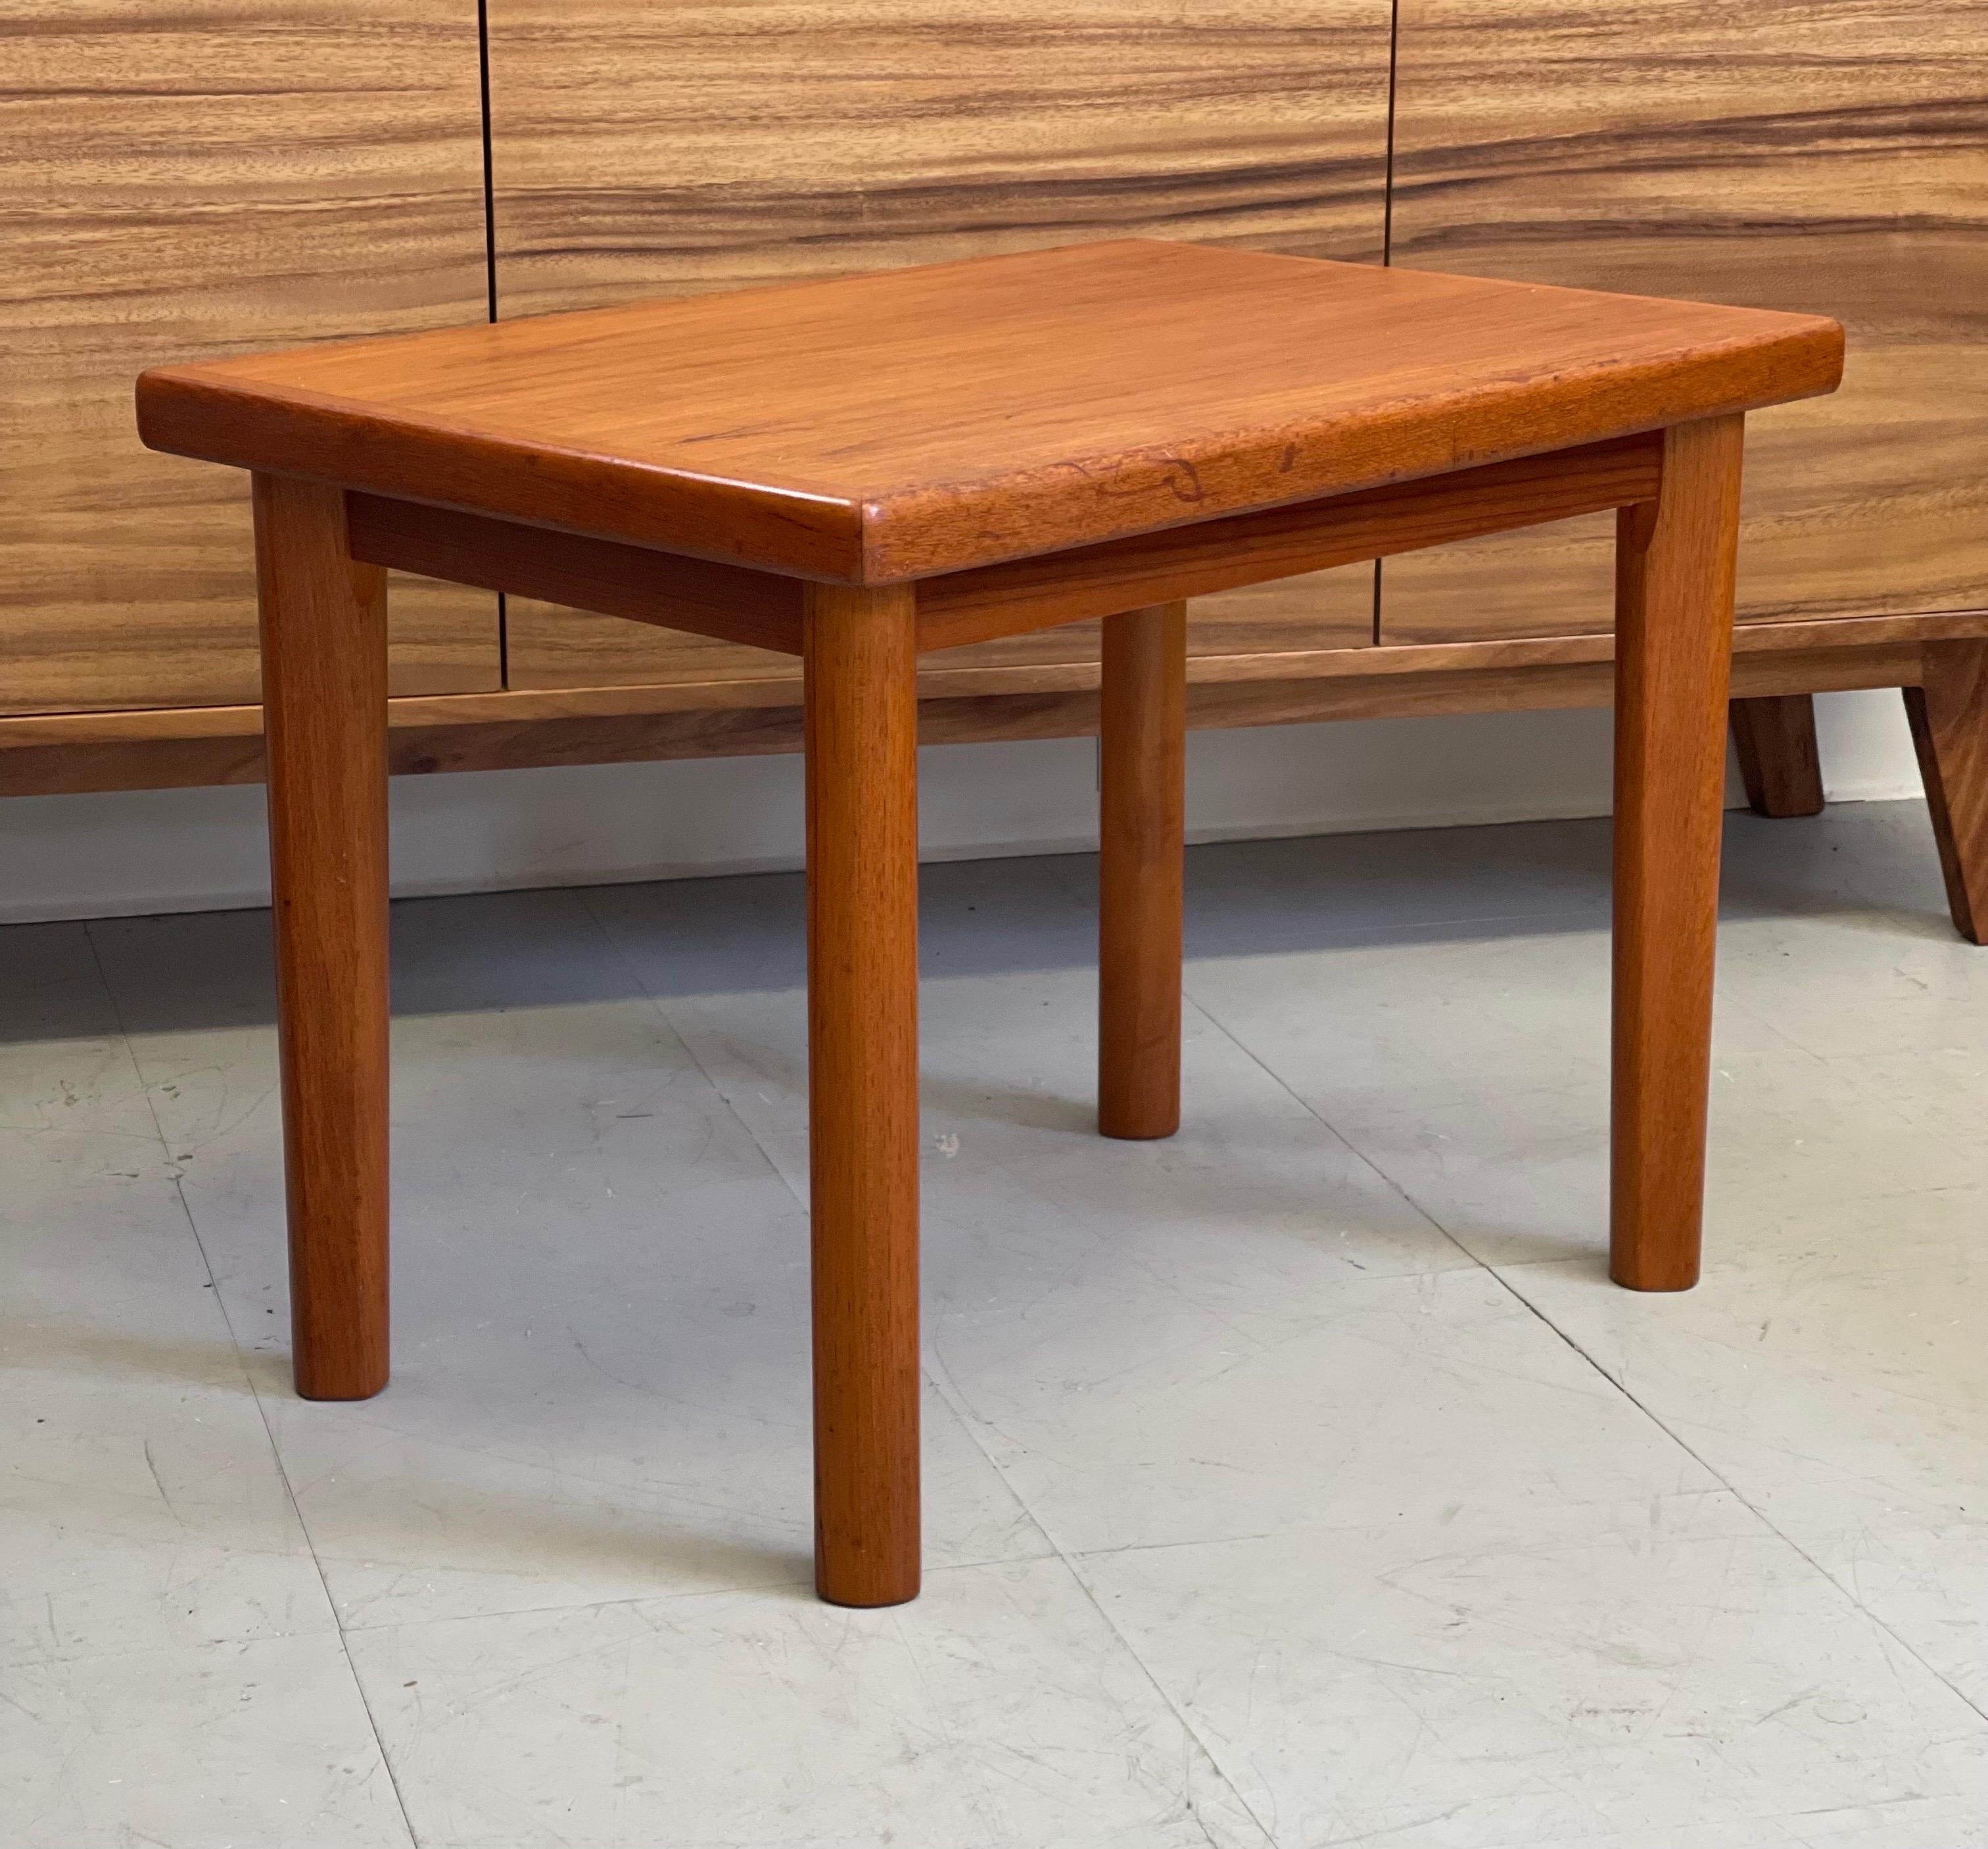 Vintage Danish Modern Mid-Century Modern Accent Table In Good Condition For Sale In Seattle, WA